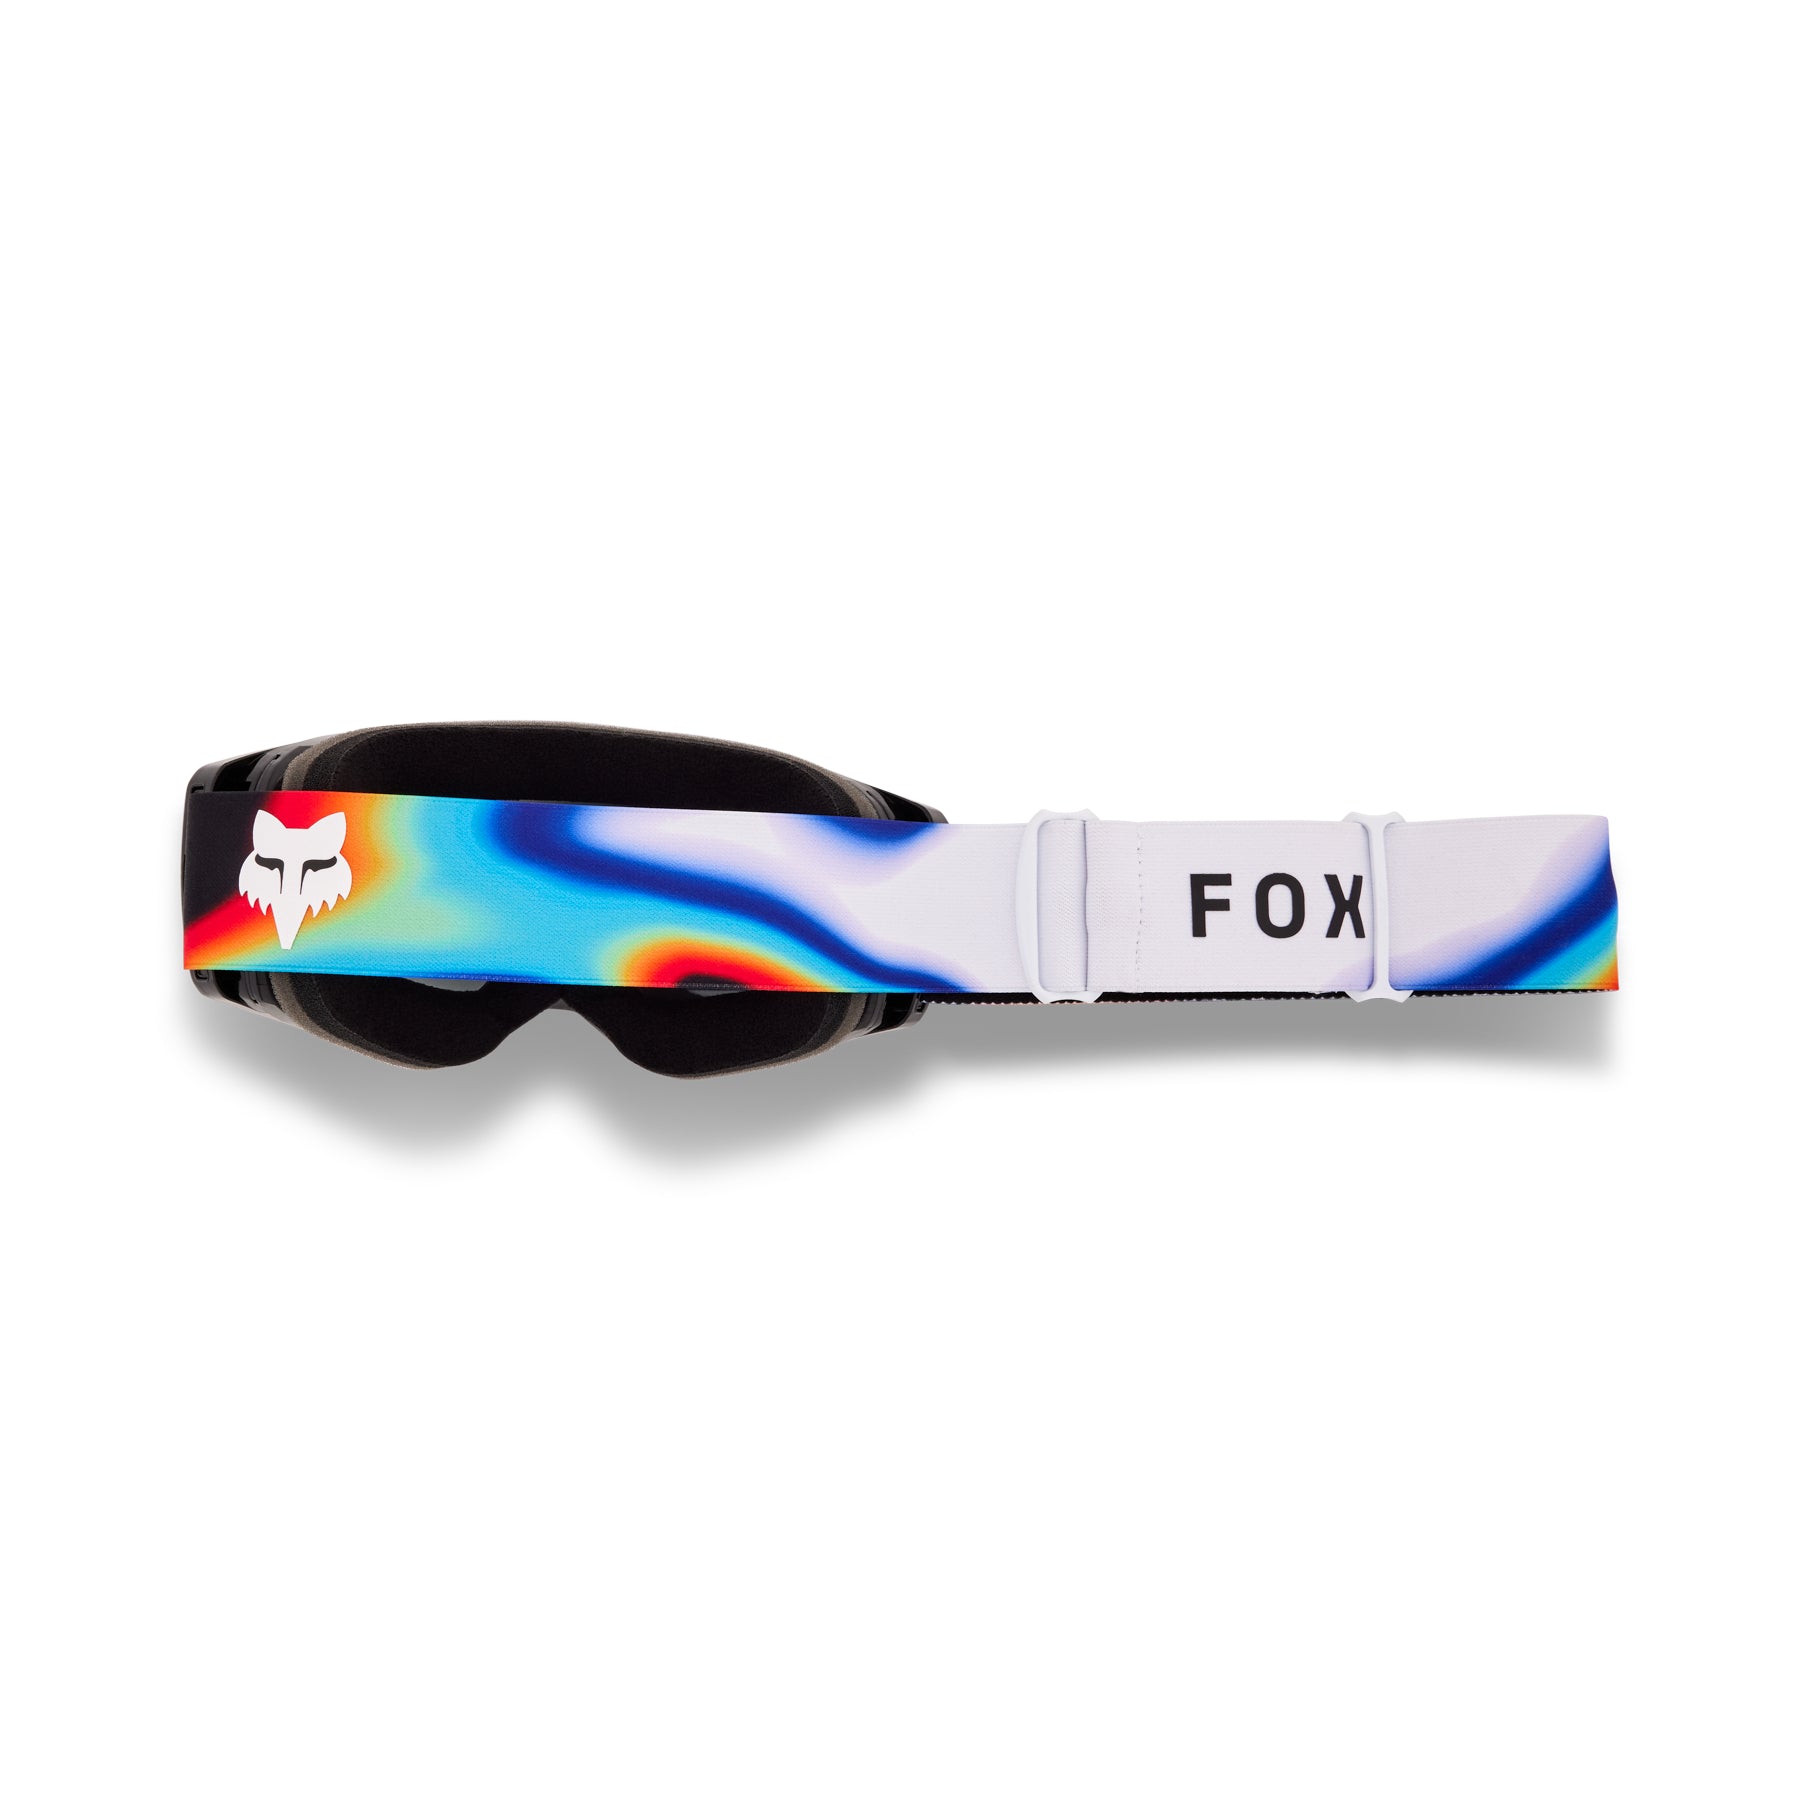 Fox Vue MRI Goggles - One Size Fits Most - White - Injected Mirror Lens - Image 2